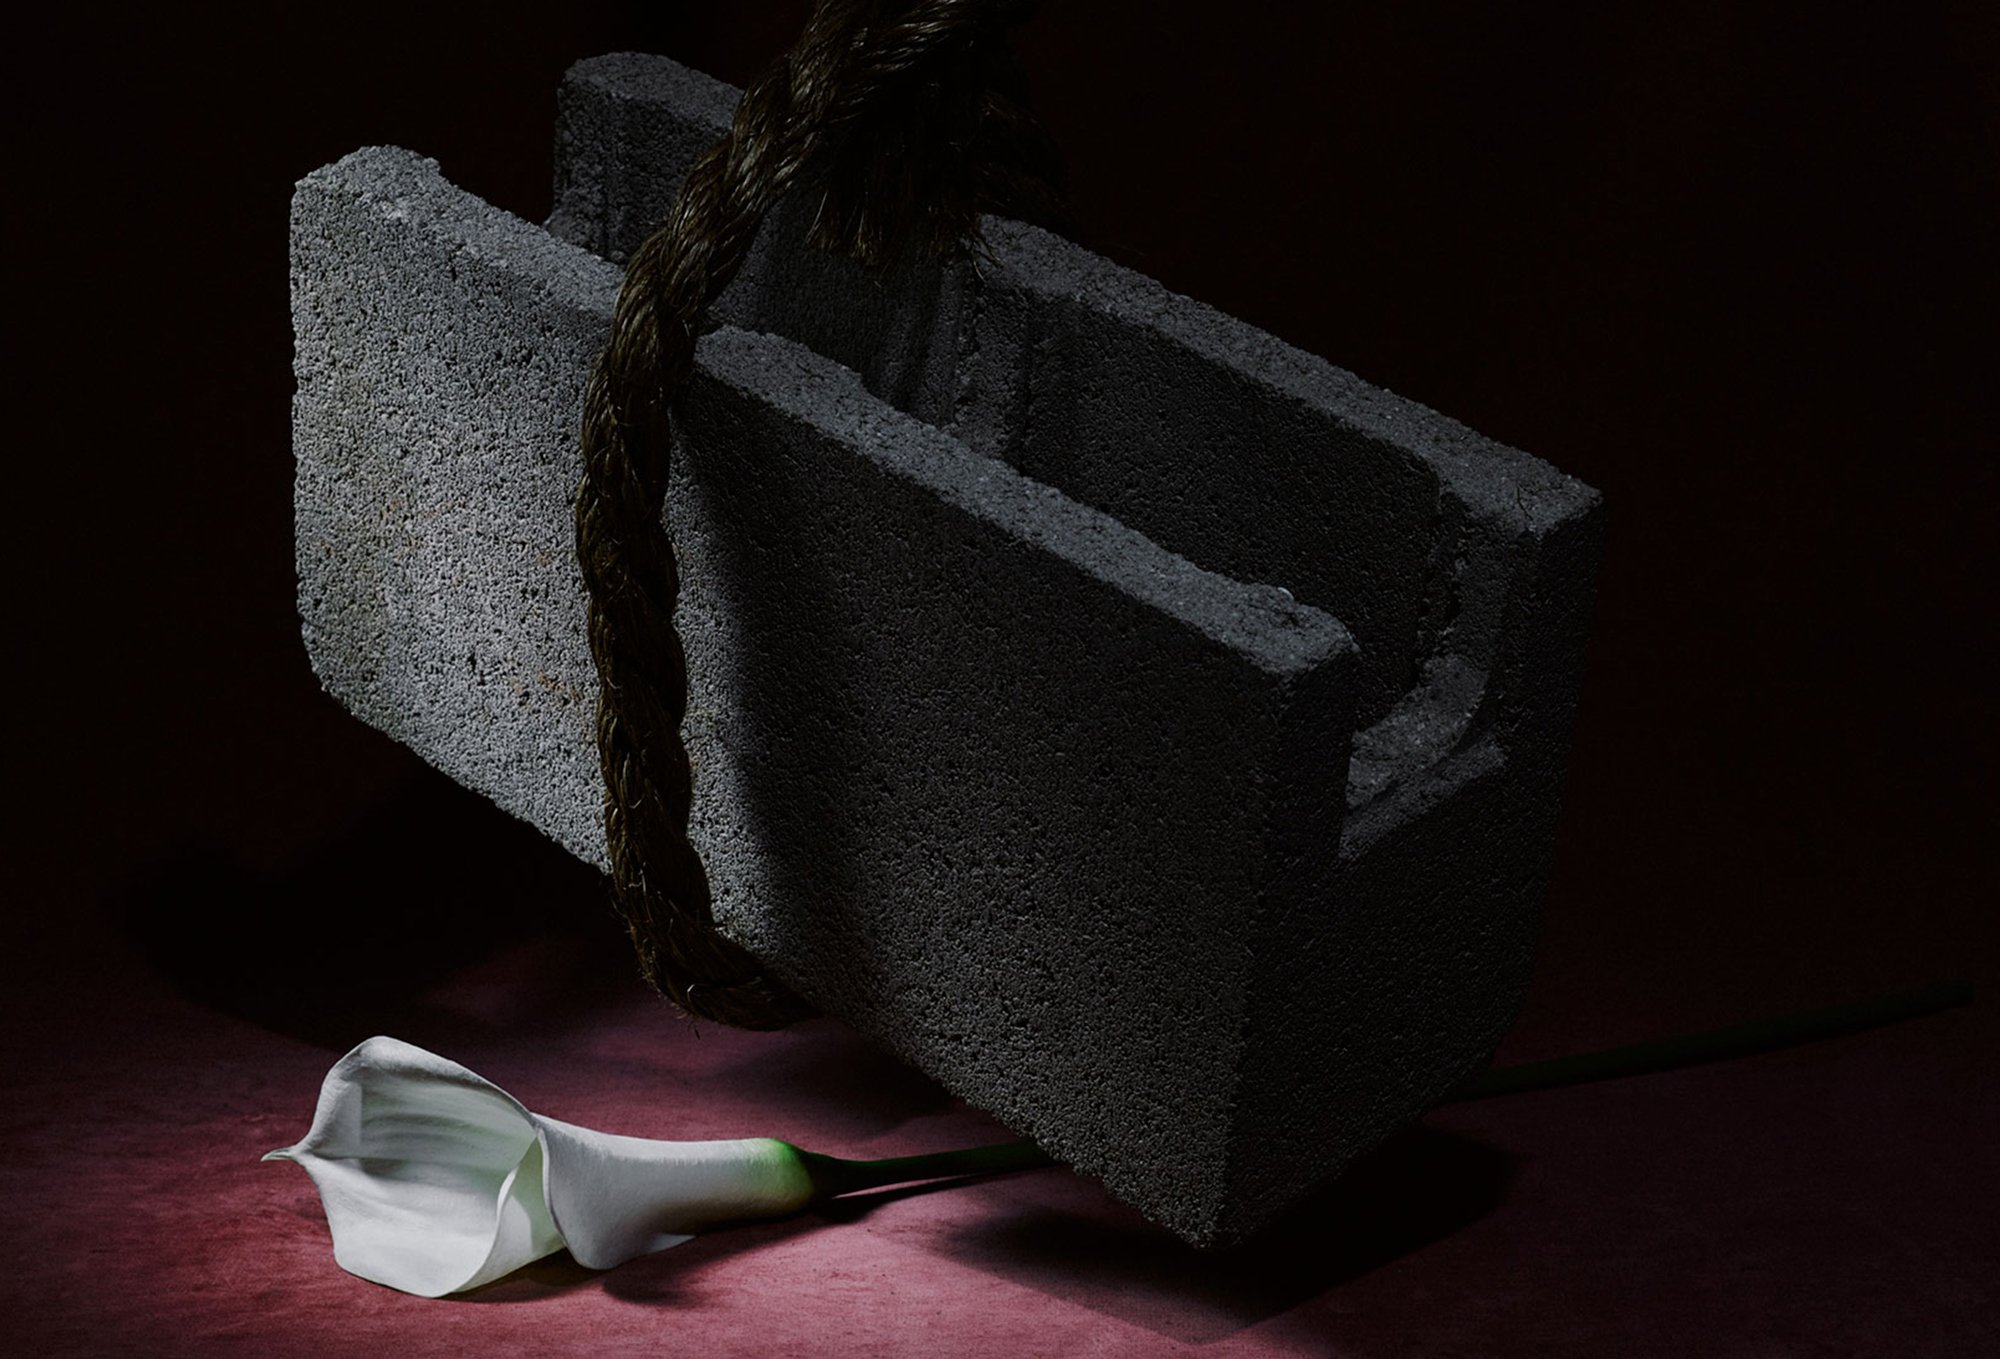 Still image of cinder block hanging over white calla lily flower for Romance Journal Issue 02 Resistance. Publication design, art direction, print design by RoAndCo.